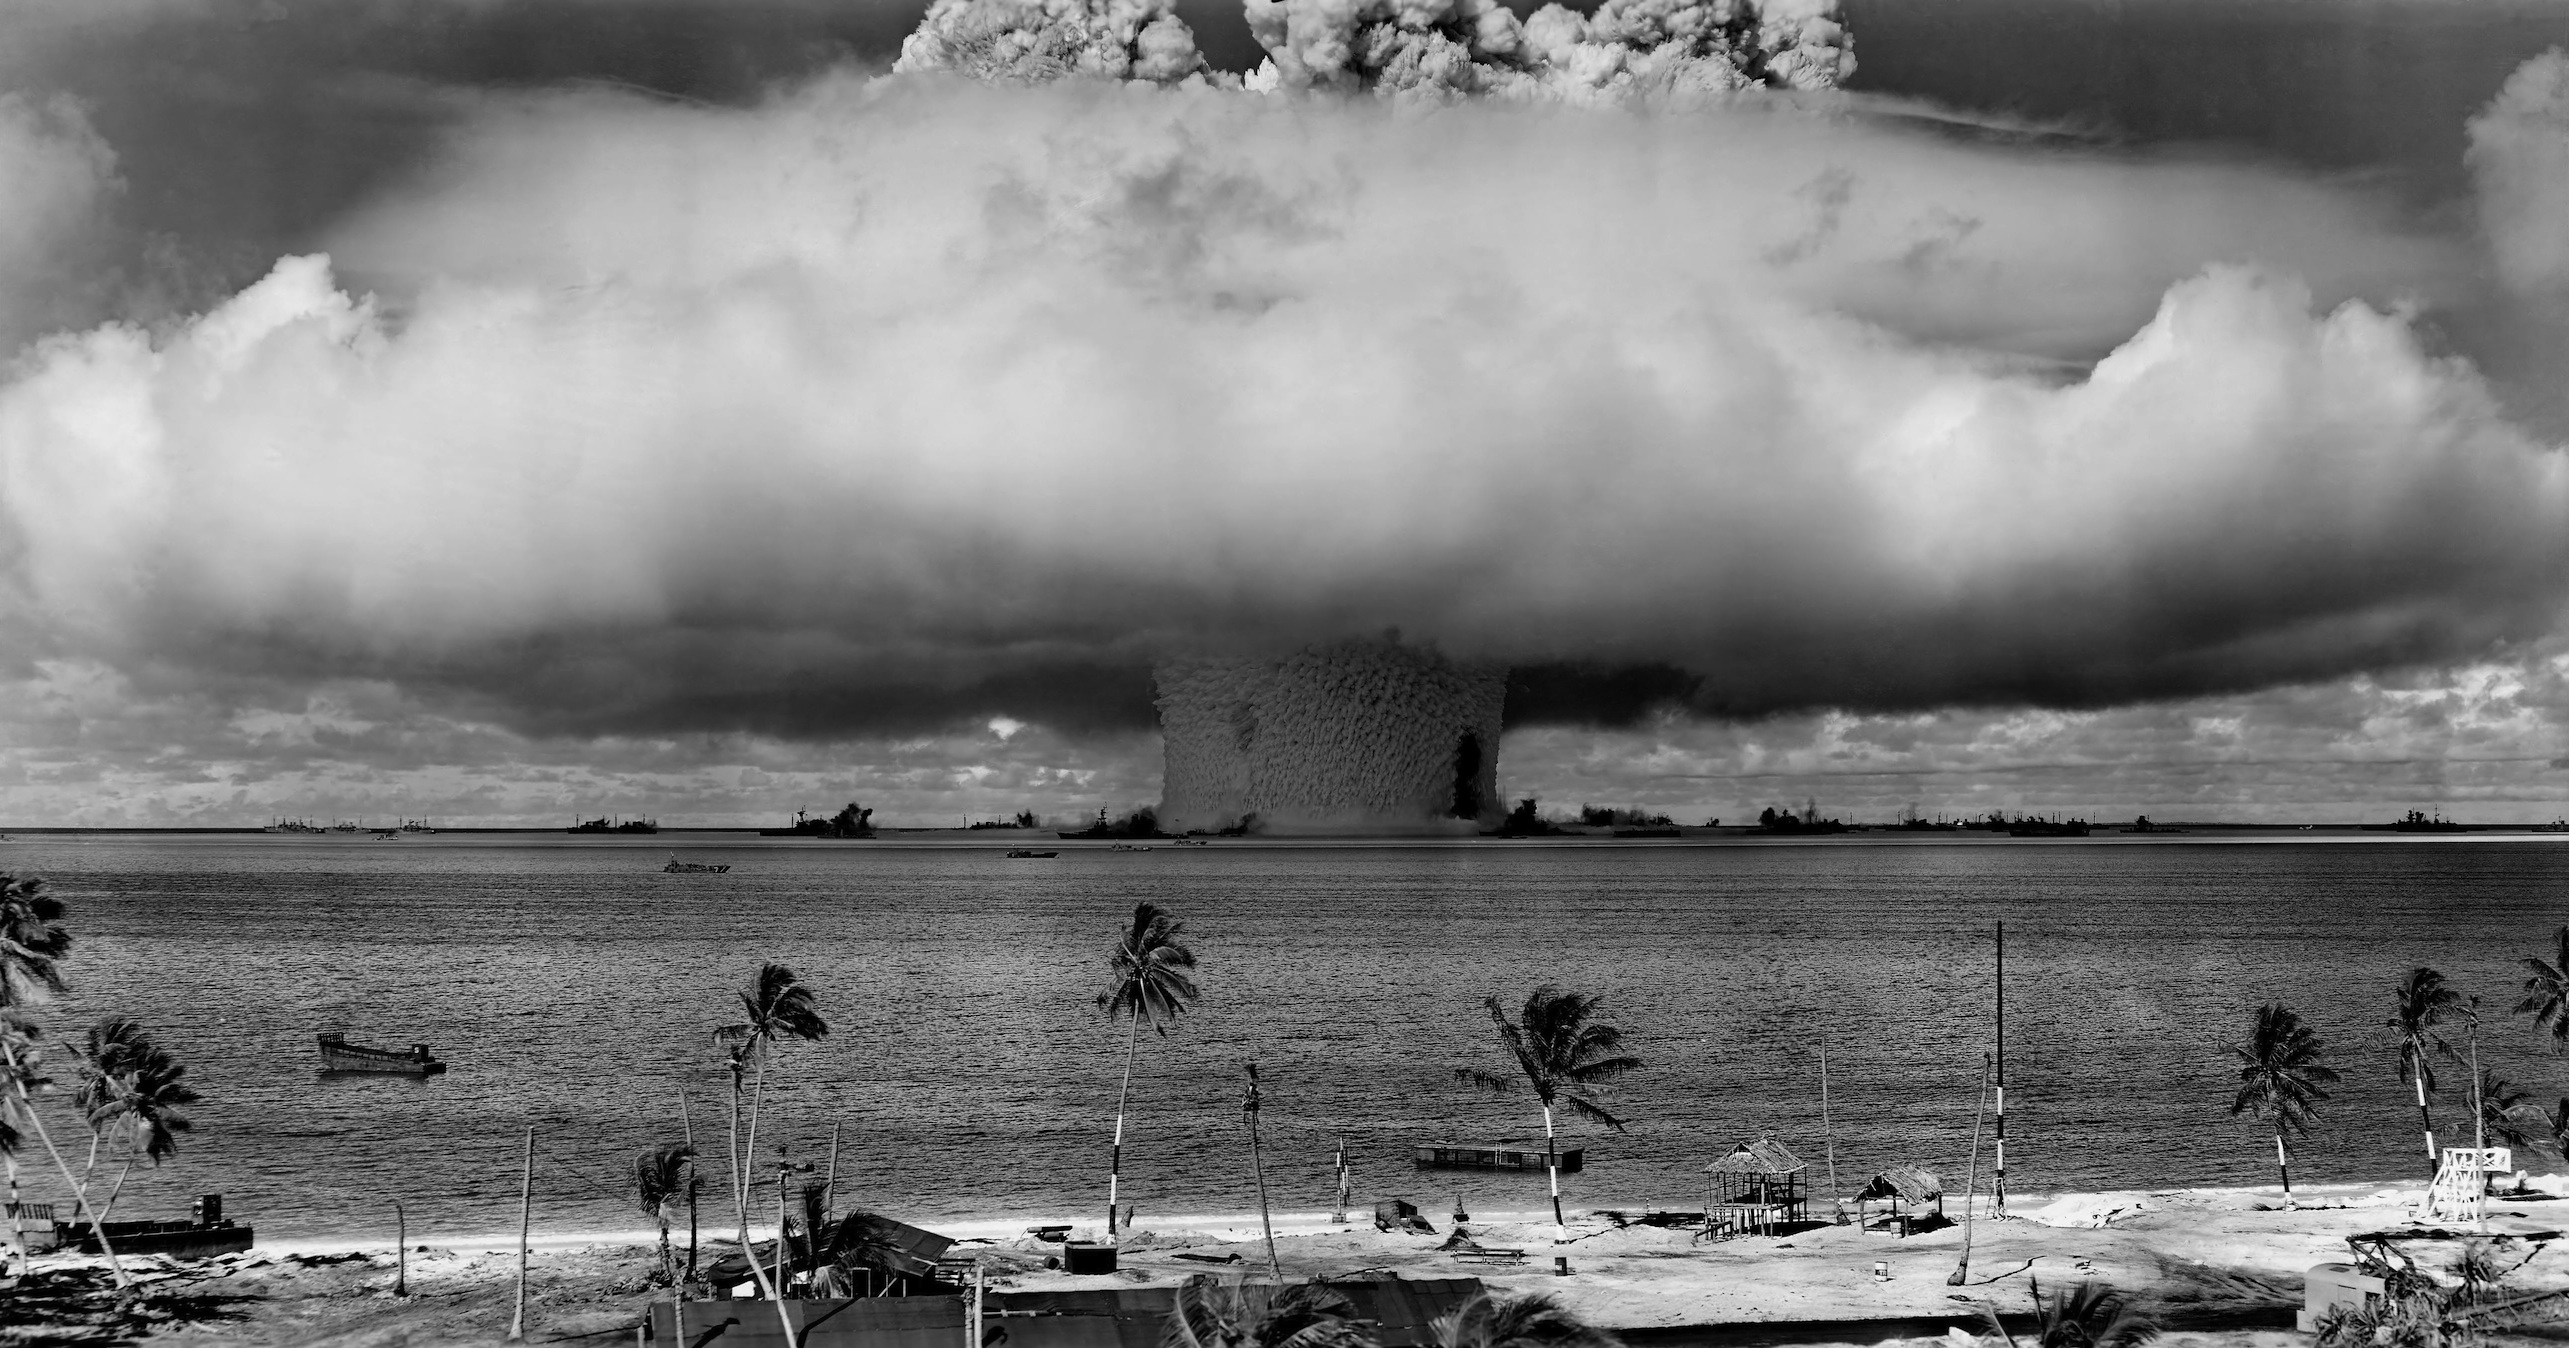 Black Amp White Bomb Explosion Military Nuclear War 2569x1348